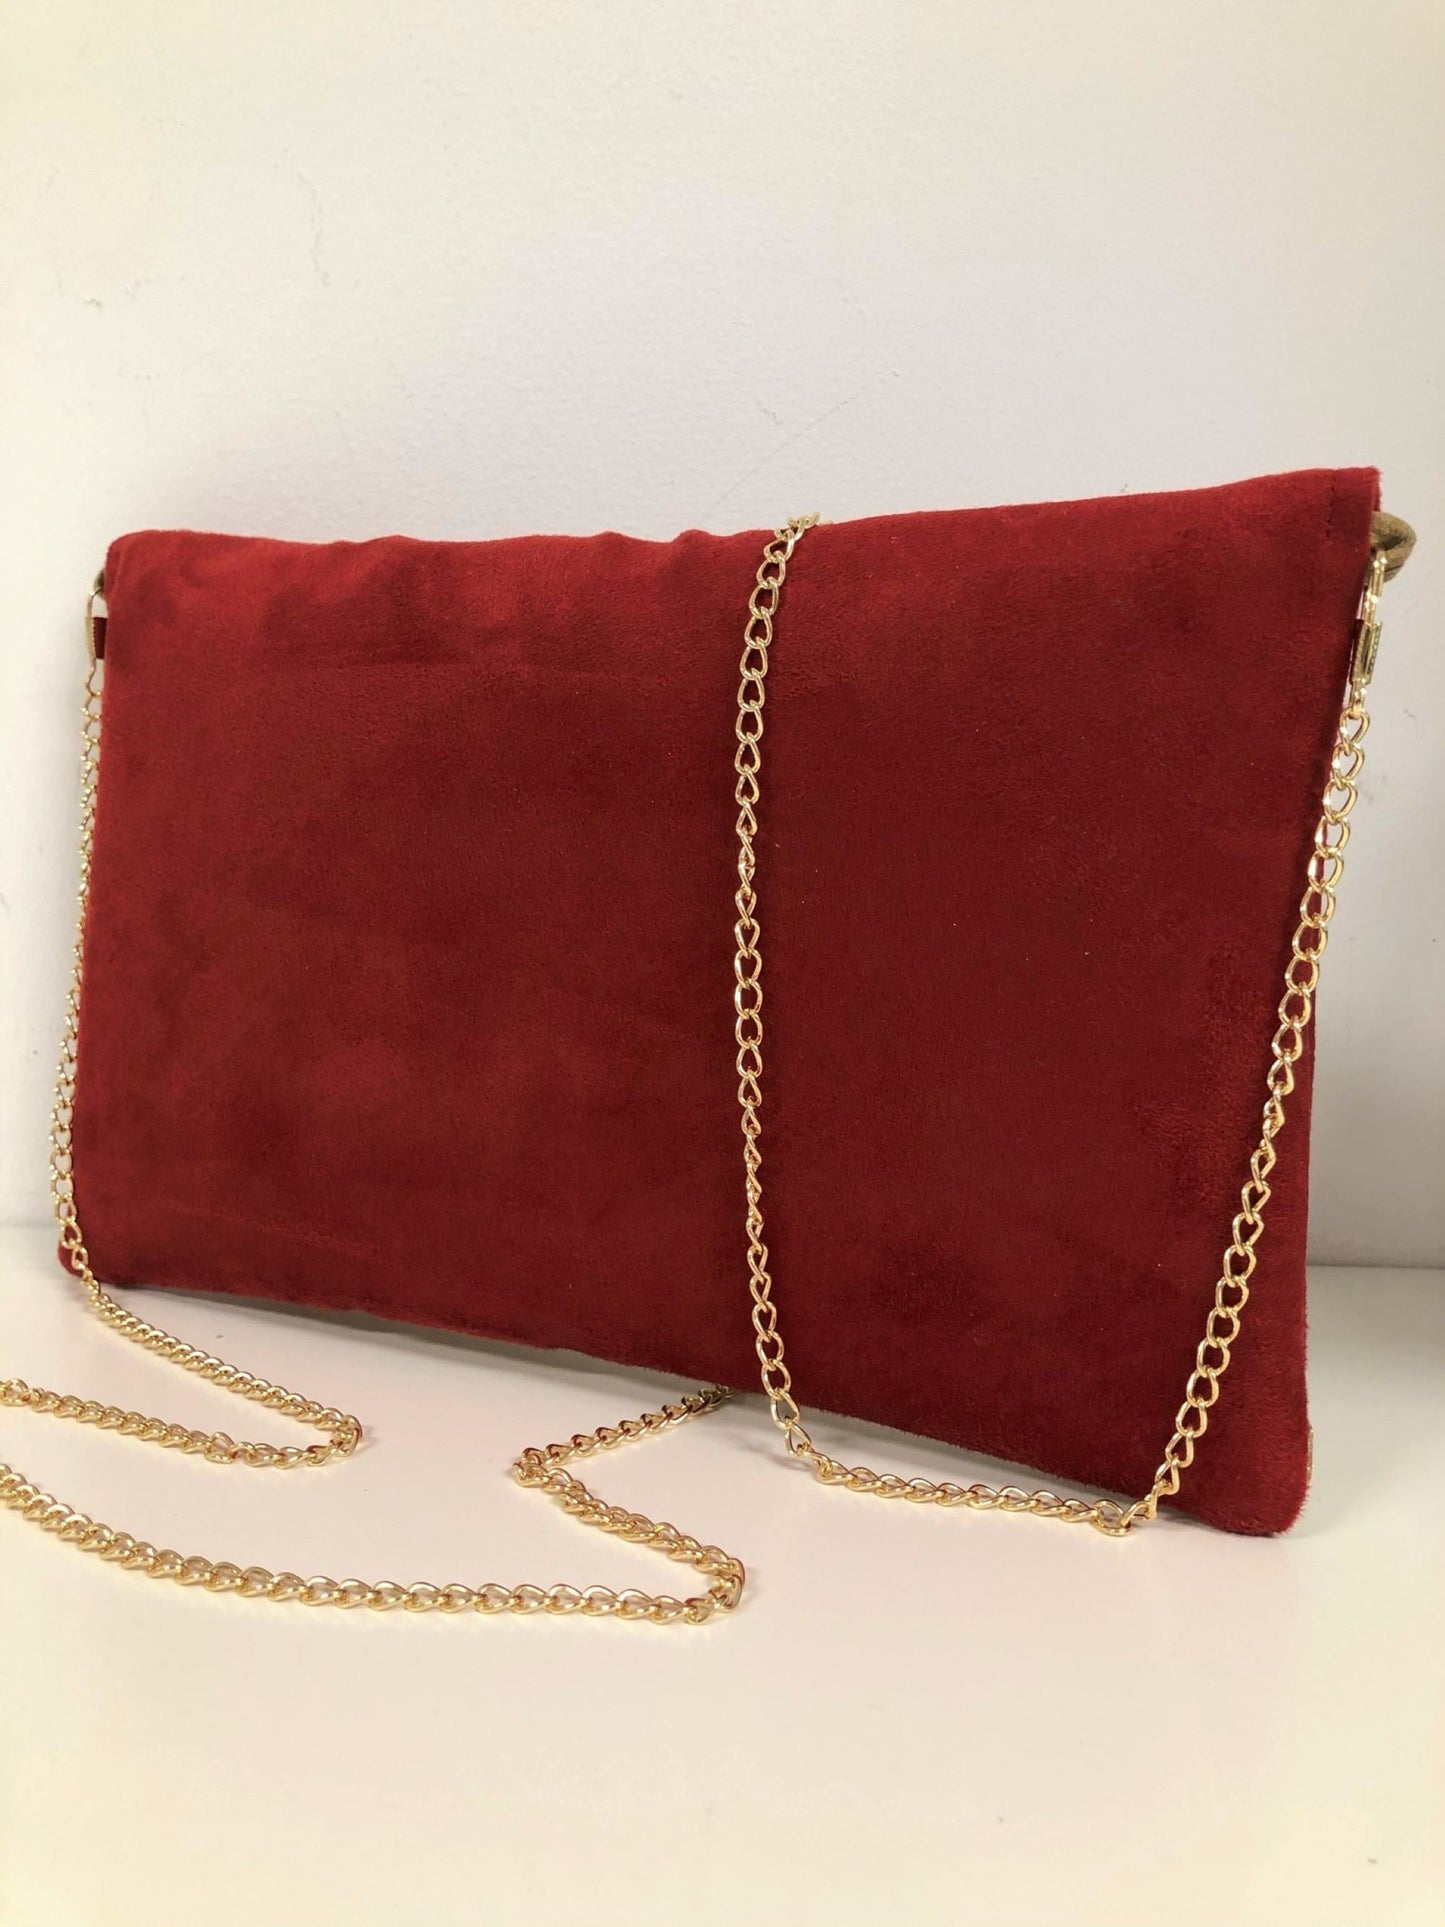 Red Isa clutch bag with gold sequins